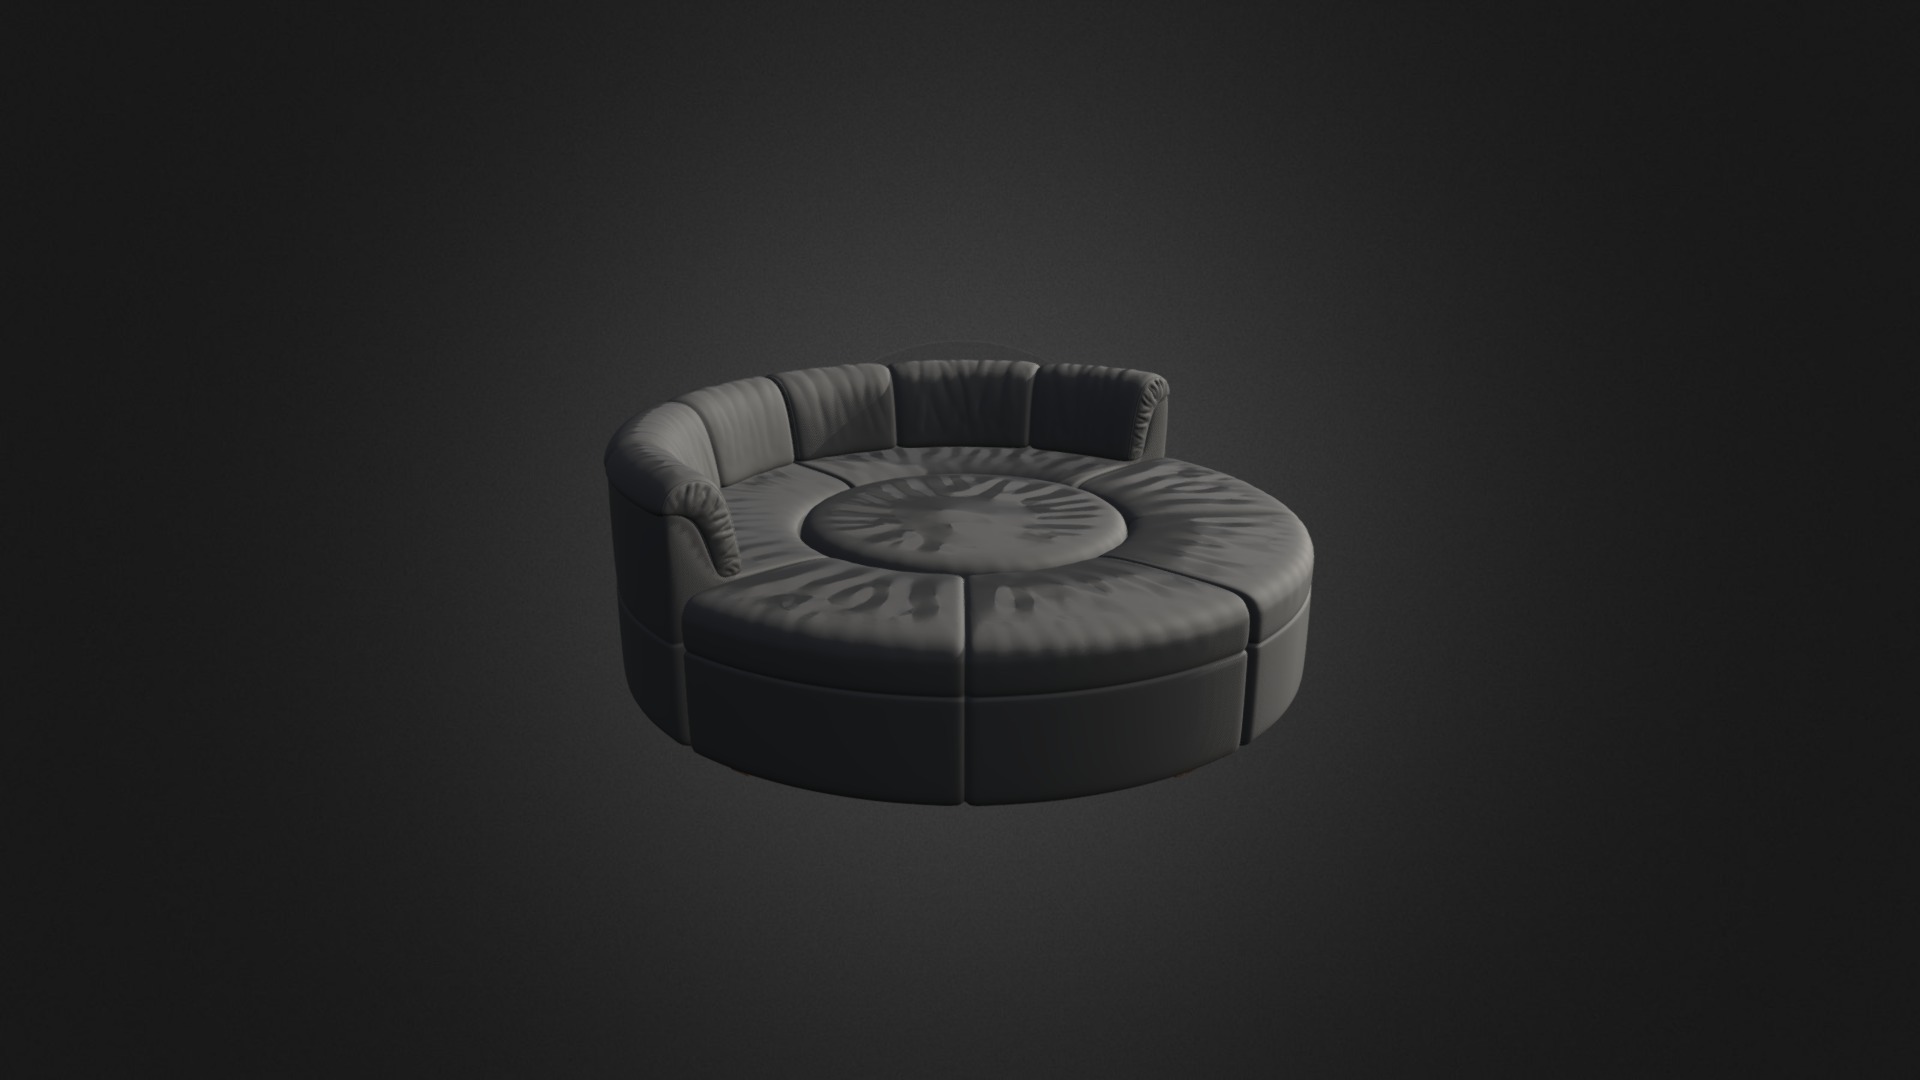 3D model Black Round Sofa - This is a 3D model of the Black Round Sofa. The 3D model is about a grey chair with a round cushion.